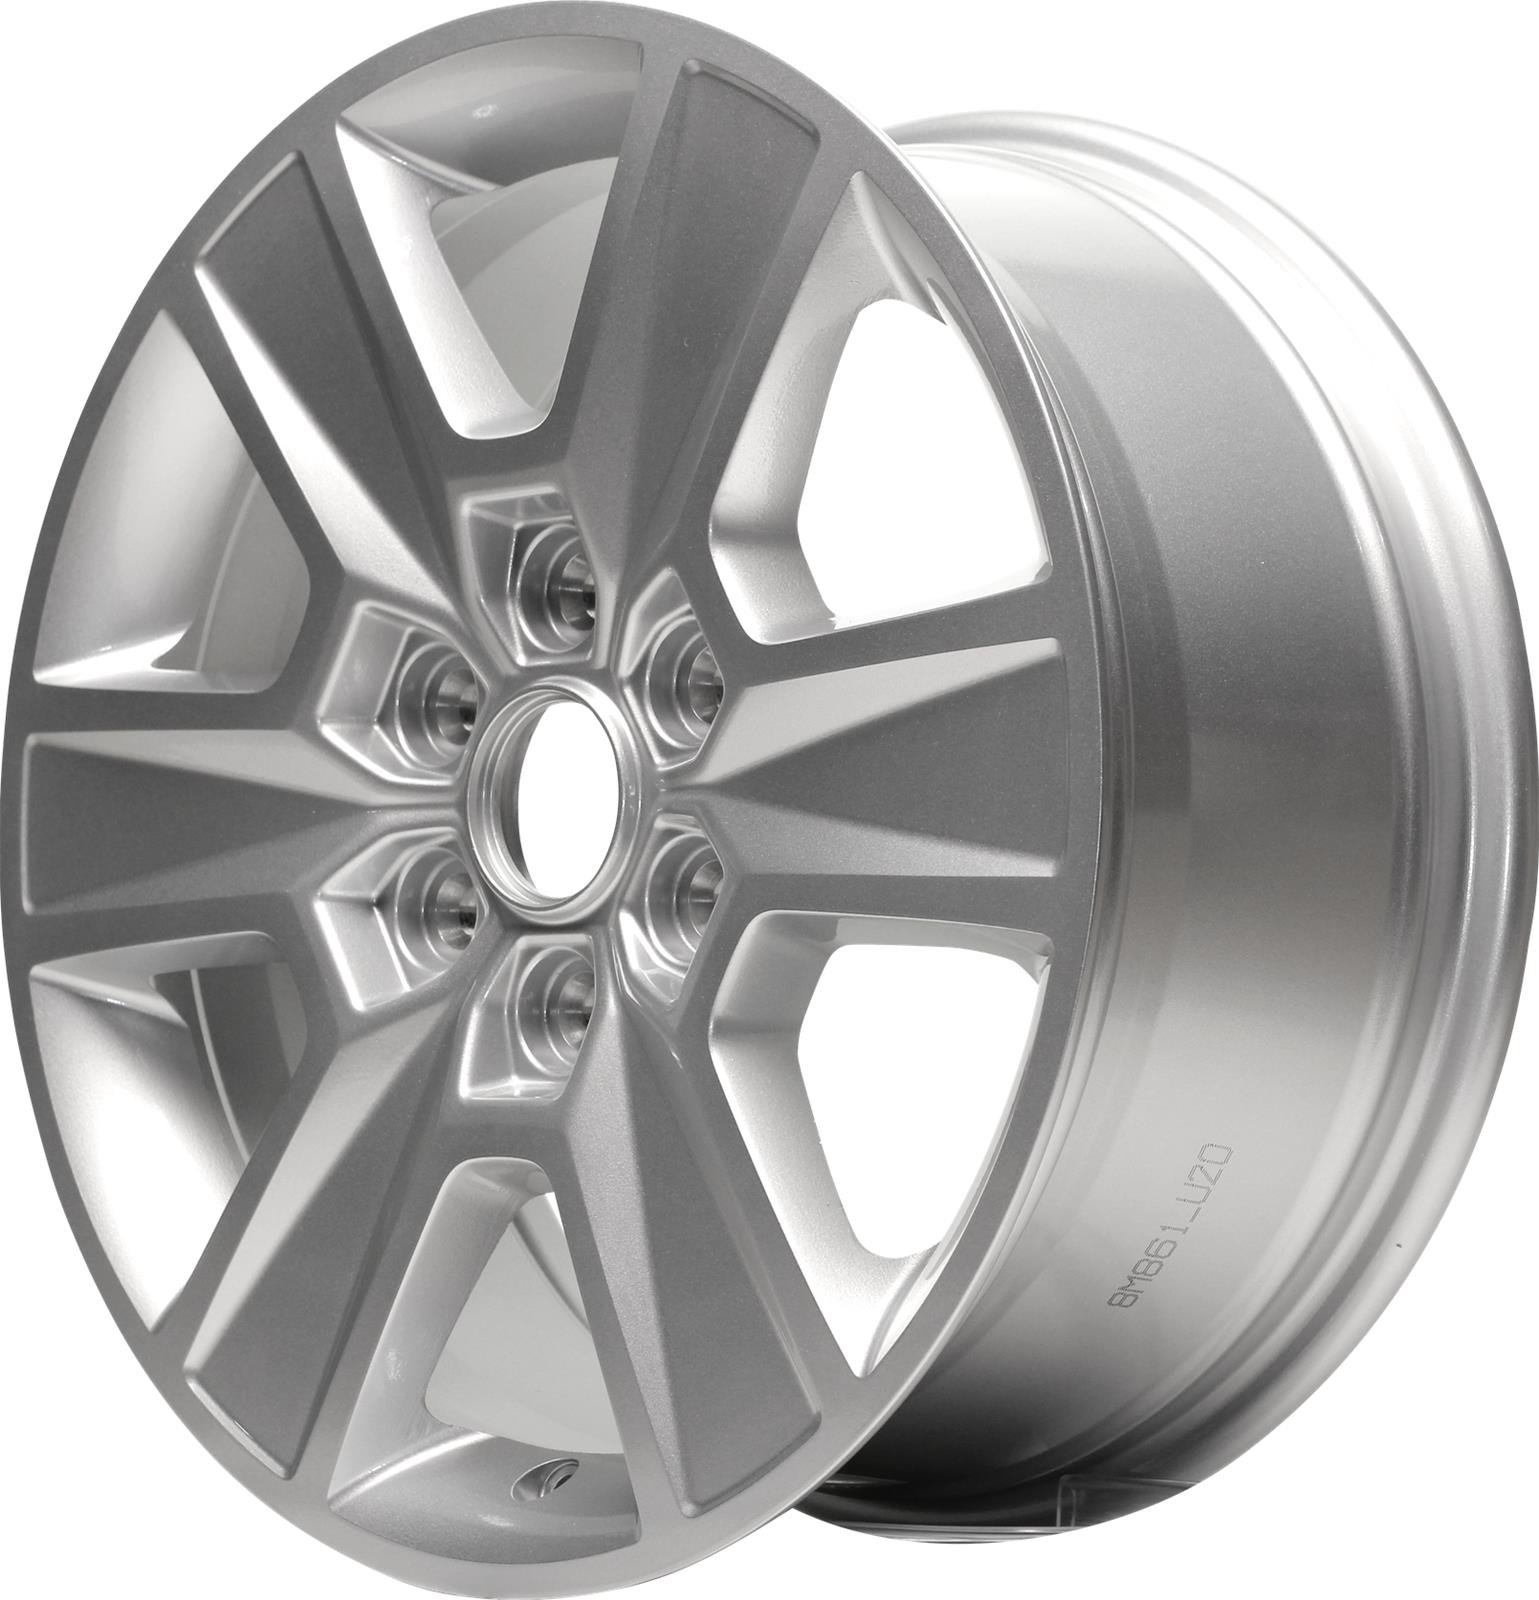 2019 FORD F 150 Jante Wheel ALY03999U20N Jante Replacement Wheels ...